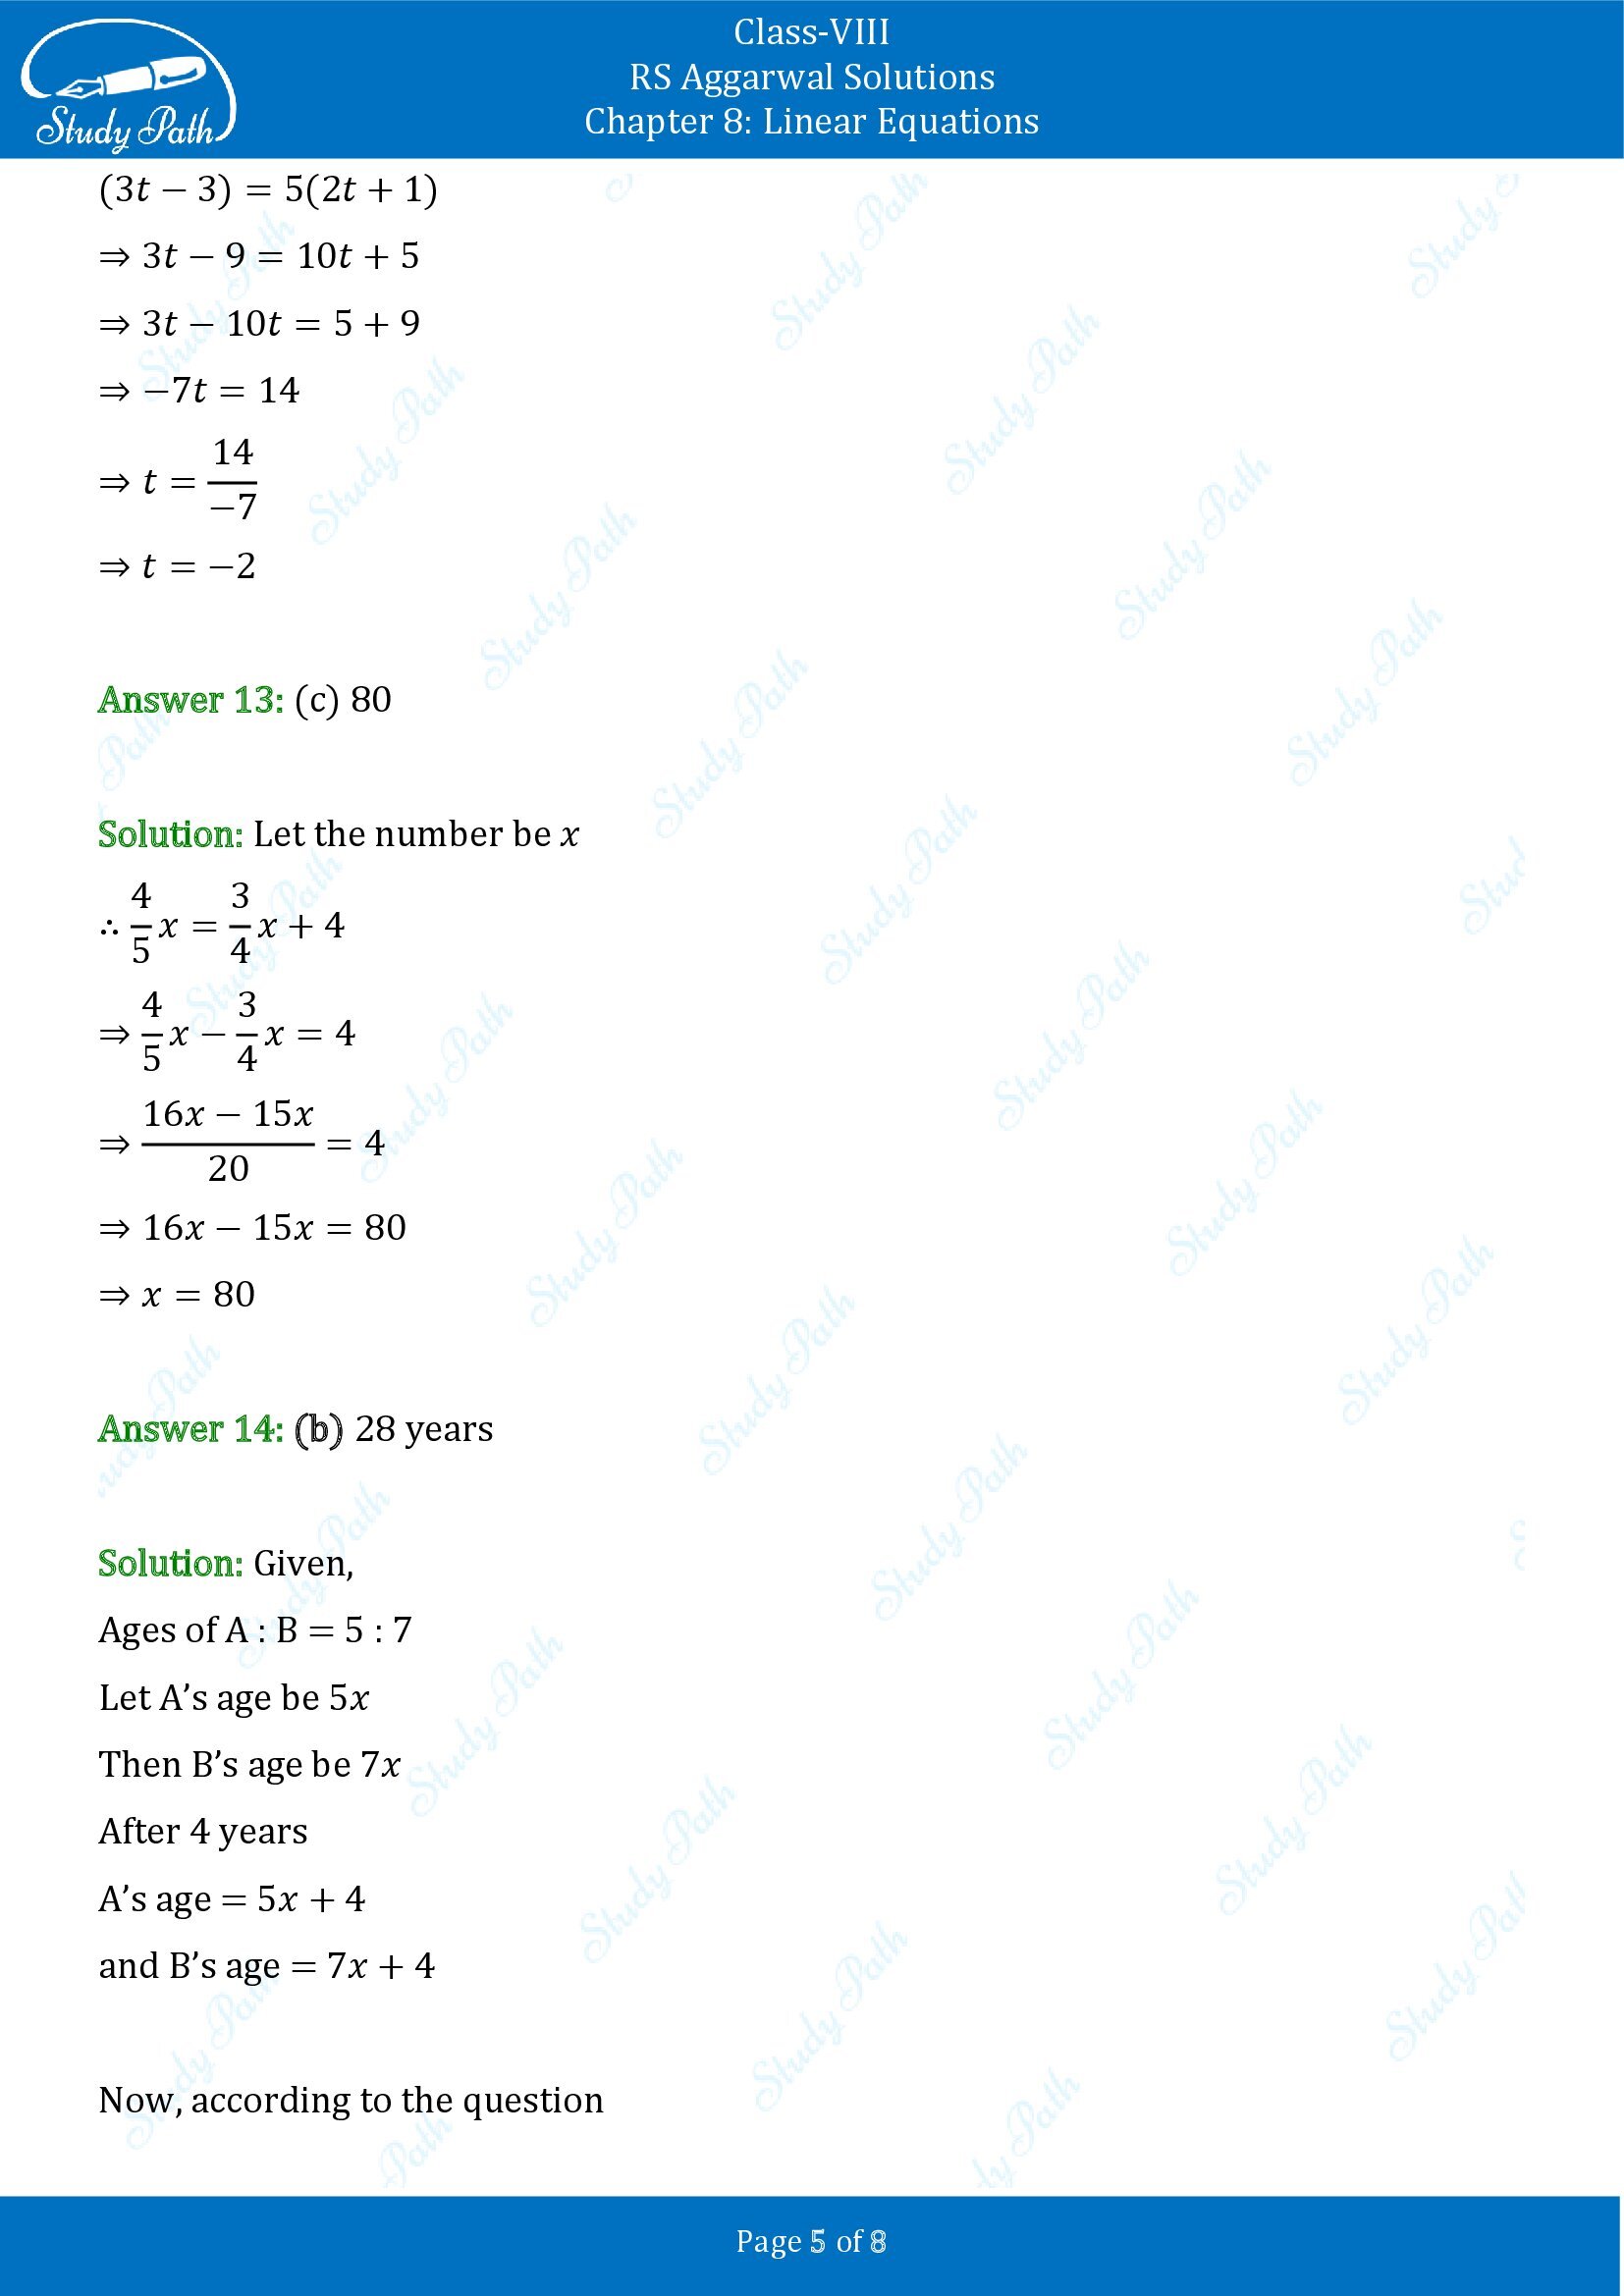 RS Aggarwal Solutions Class 8 Chapter 8 Linear Equations Exercise 8C MCQs 00005